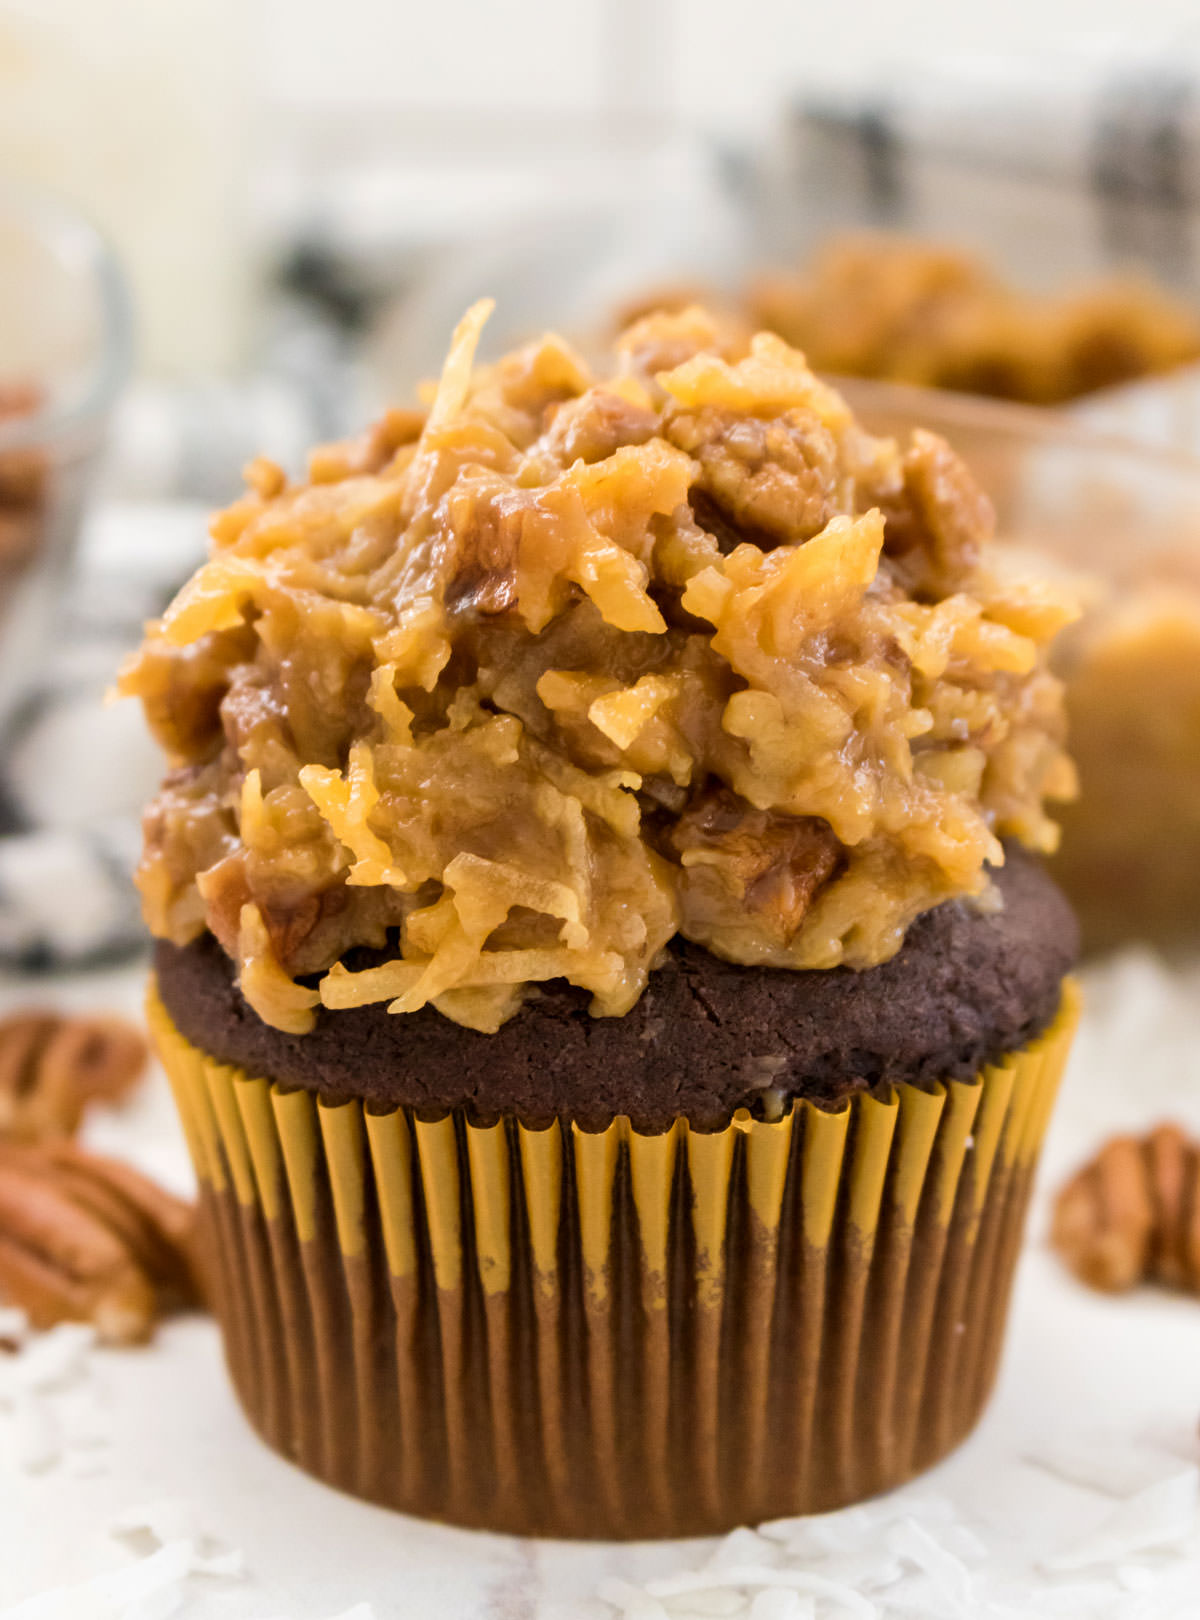 Closeup on a chocolate cupcake topped with The Best German Chocolate Cake Frosting.